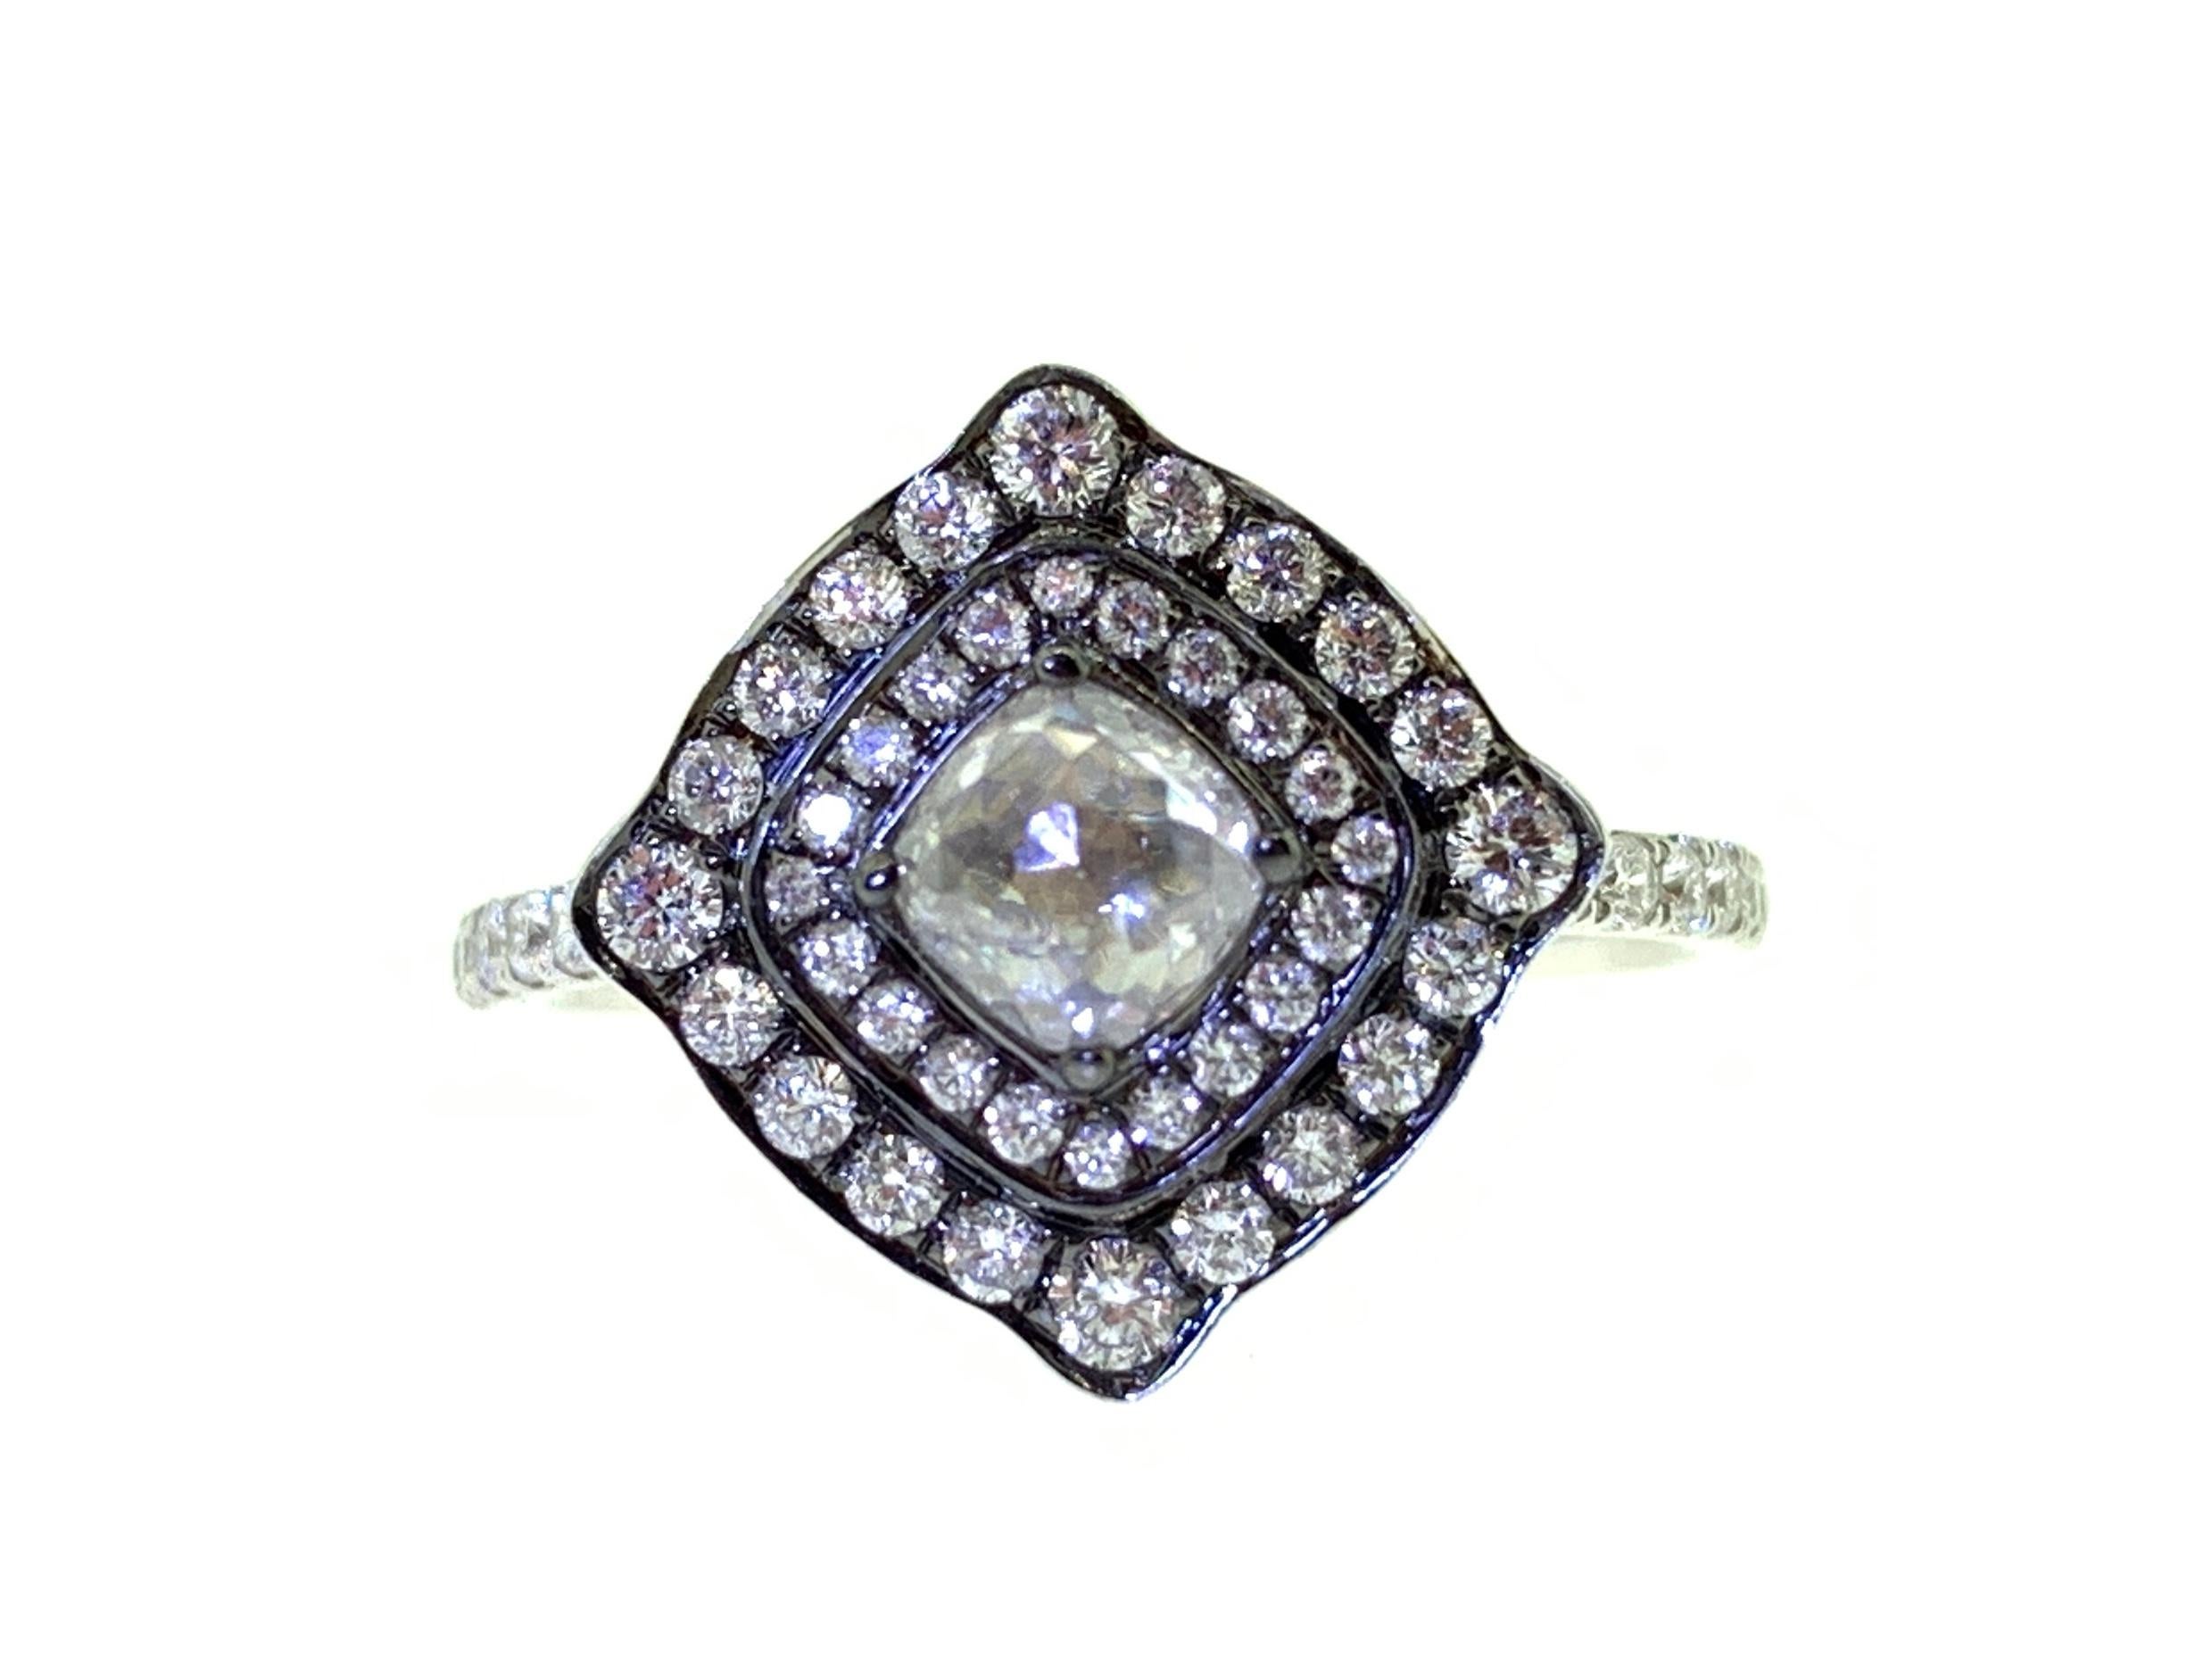 This stunning ring showcases a beautiful 0.42 Carat Rose Cut Cushion Diamond with a Double Diamond Halo on a Diamond Shank. This ring designed in the style of Art Nouveau, and is set in 18k White Gold. Total Diamond Weight (not including center